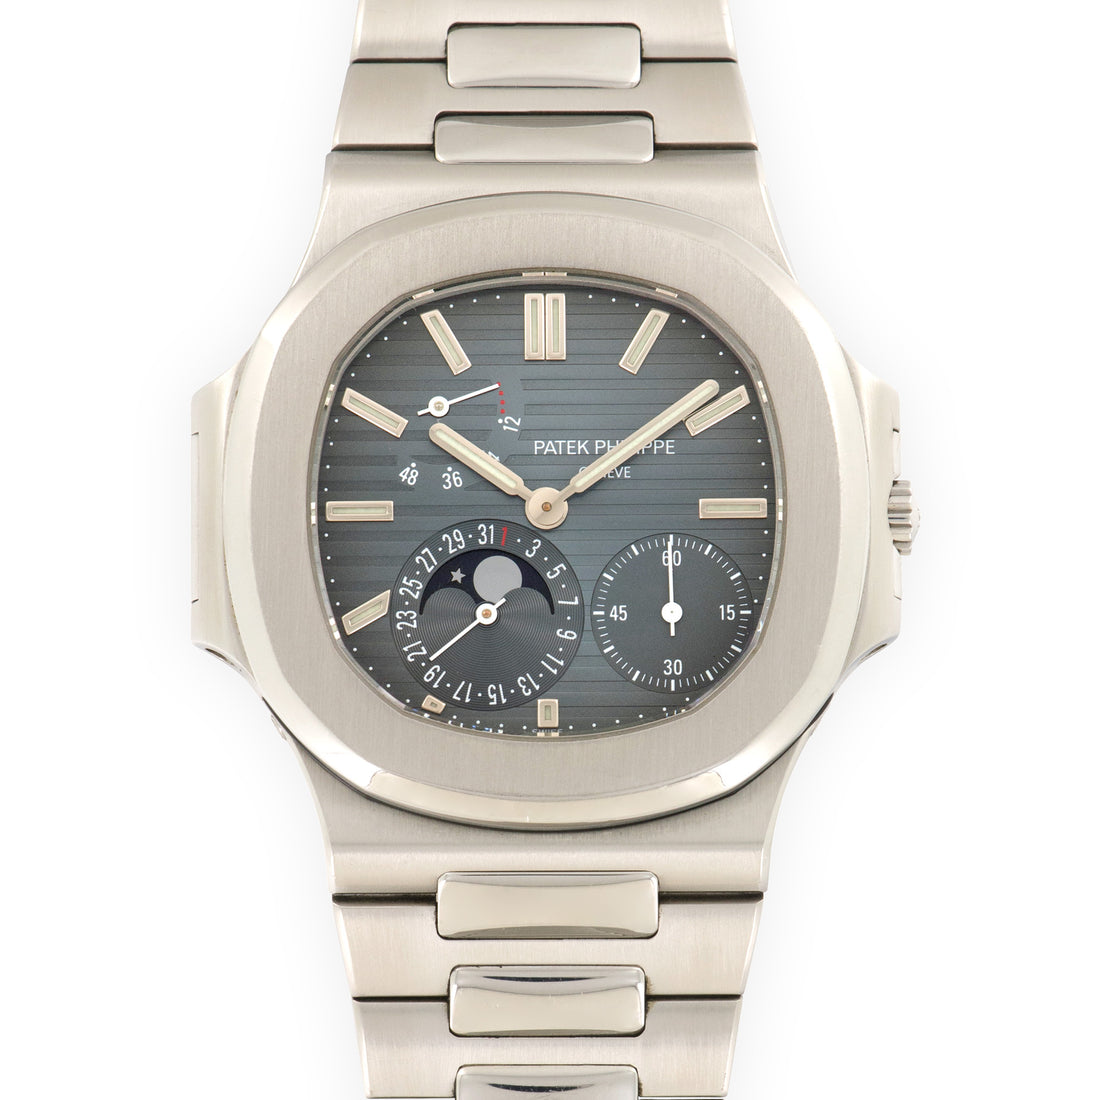 Patek Philippe Steel Nautilus Moonphase Watch Ref. 3712 with Original Box and Papers